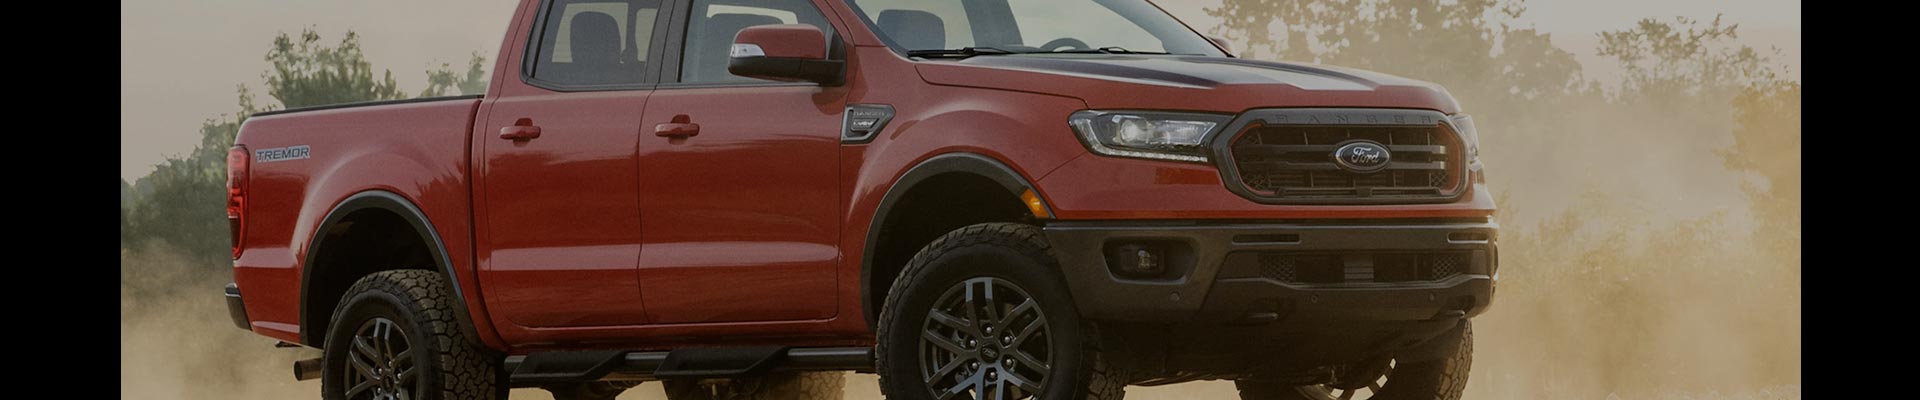 Shop Replacement and OEM Ford Ranger Parts with Discounted Price on the Net